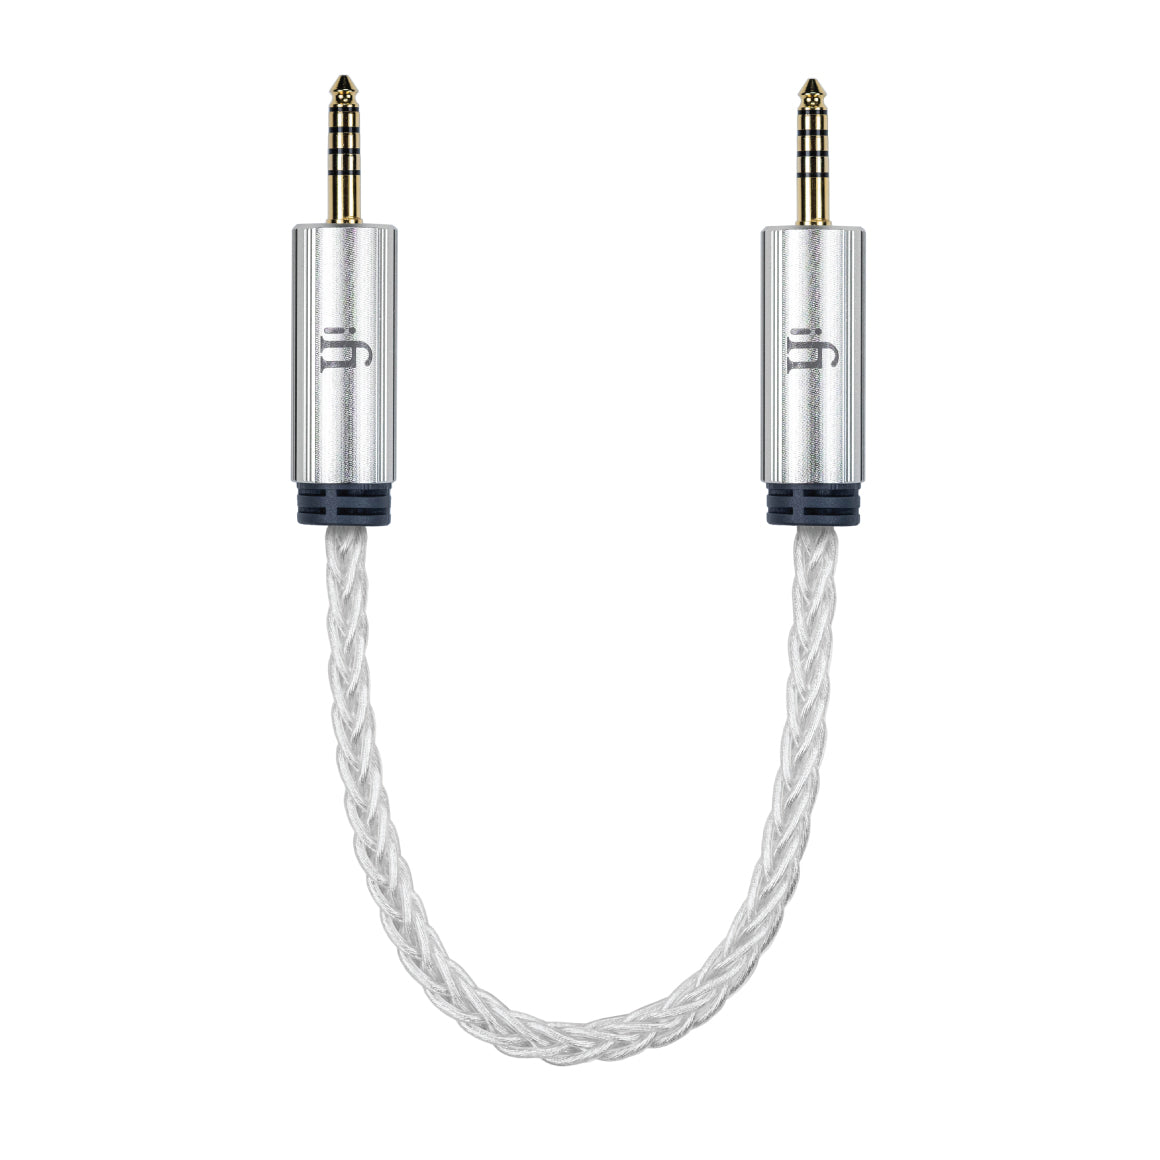 iFi Audio - 4.4mm to 4.4mm Cable